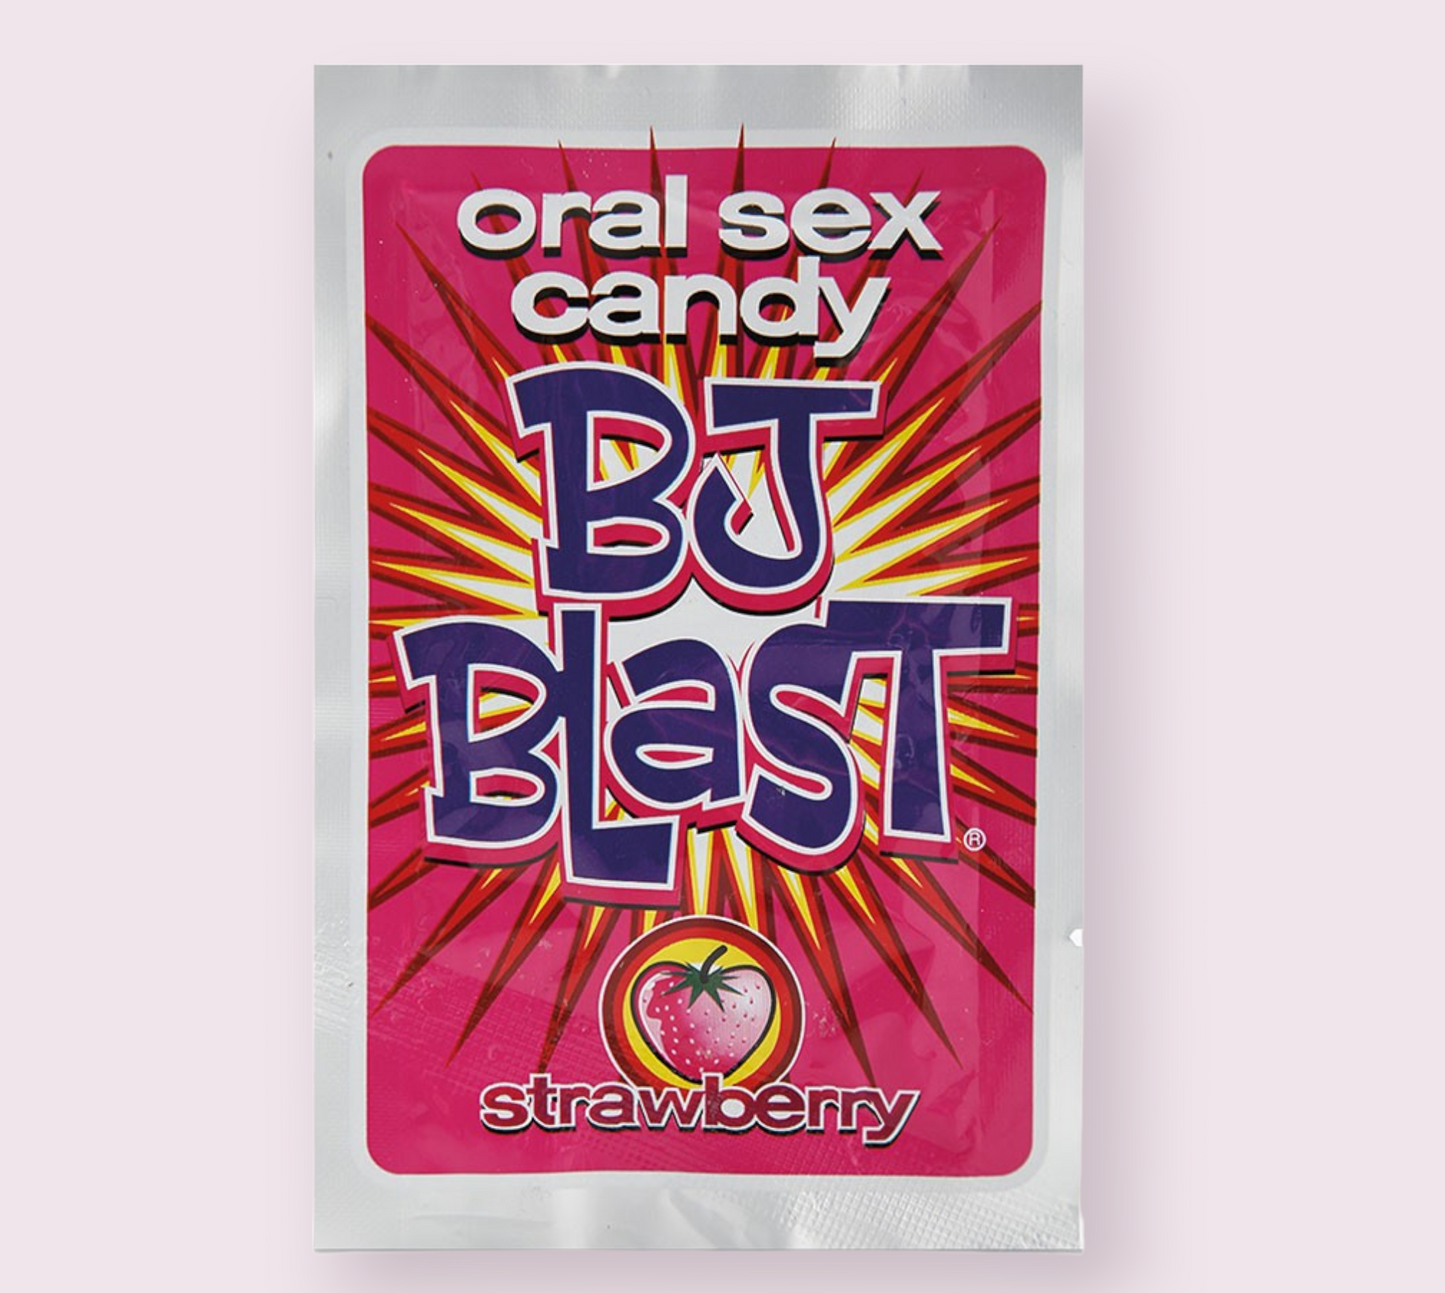 Oral sex Candy